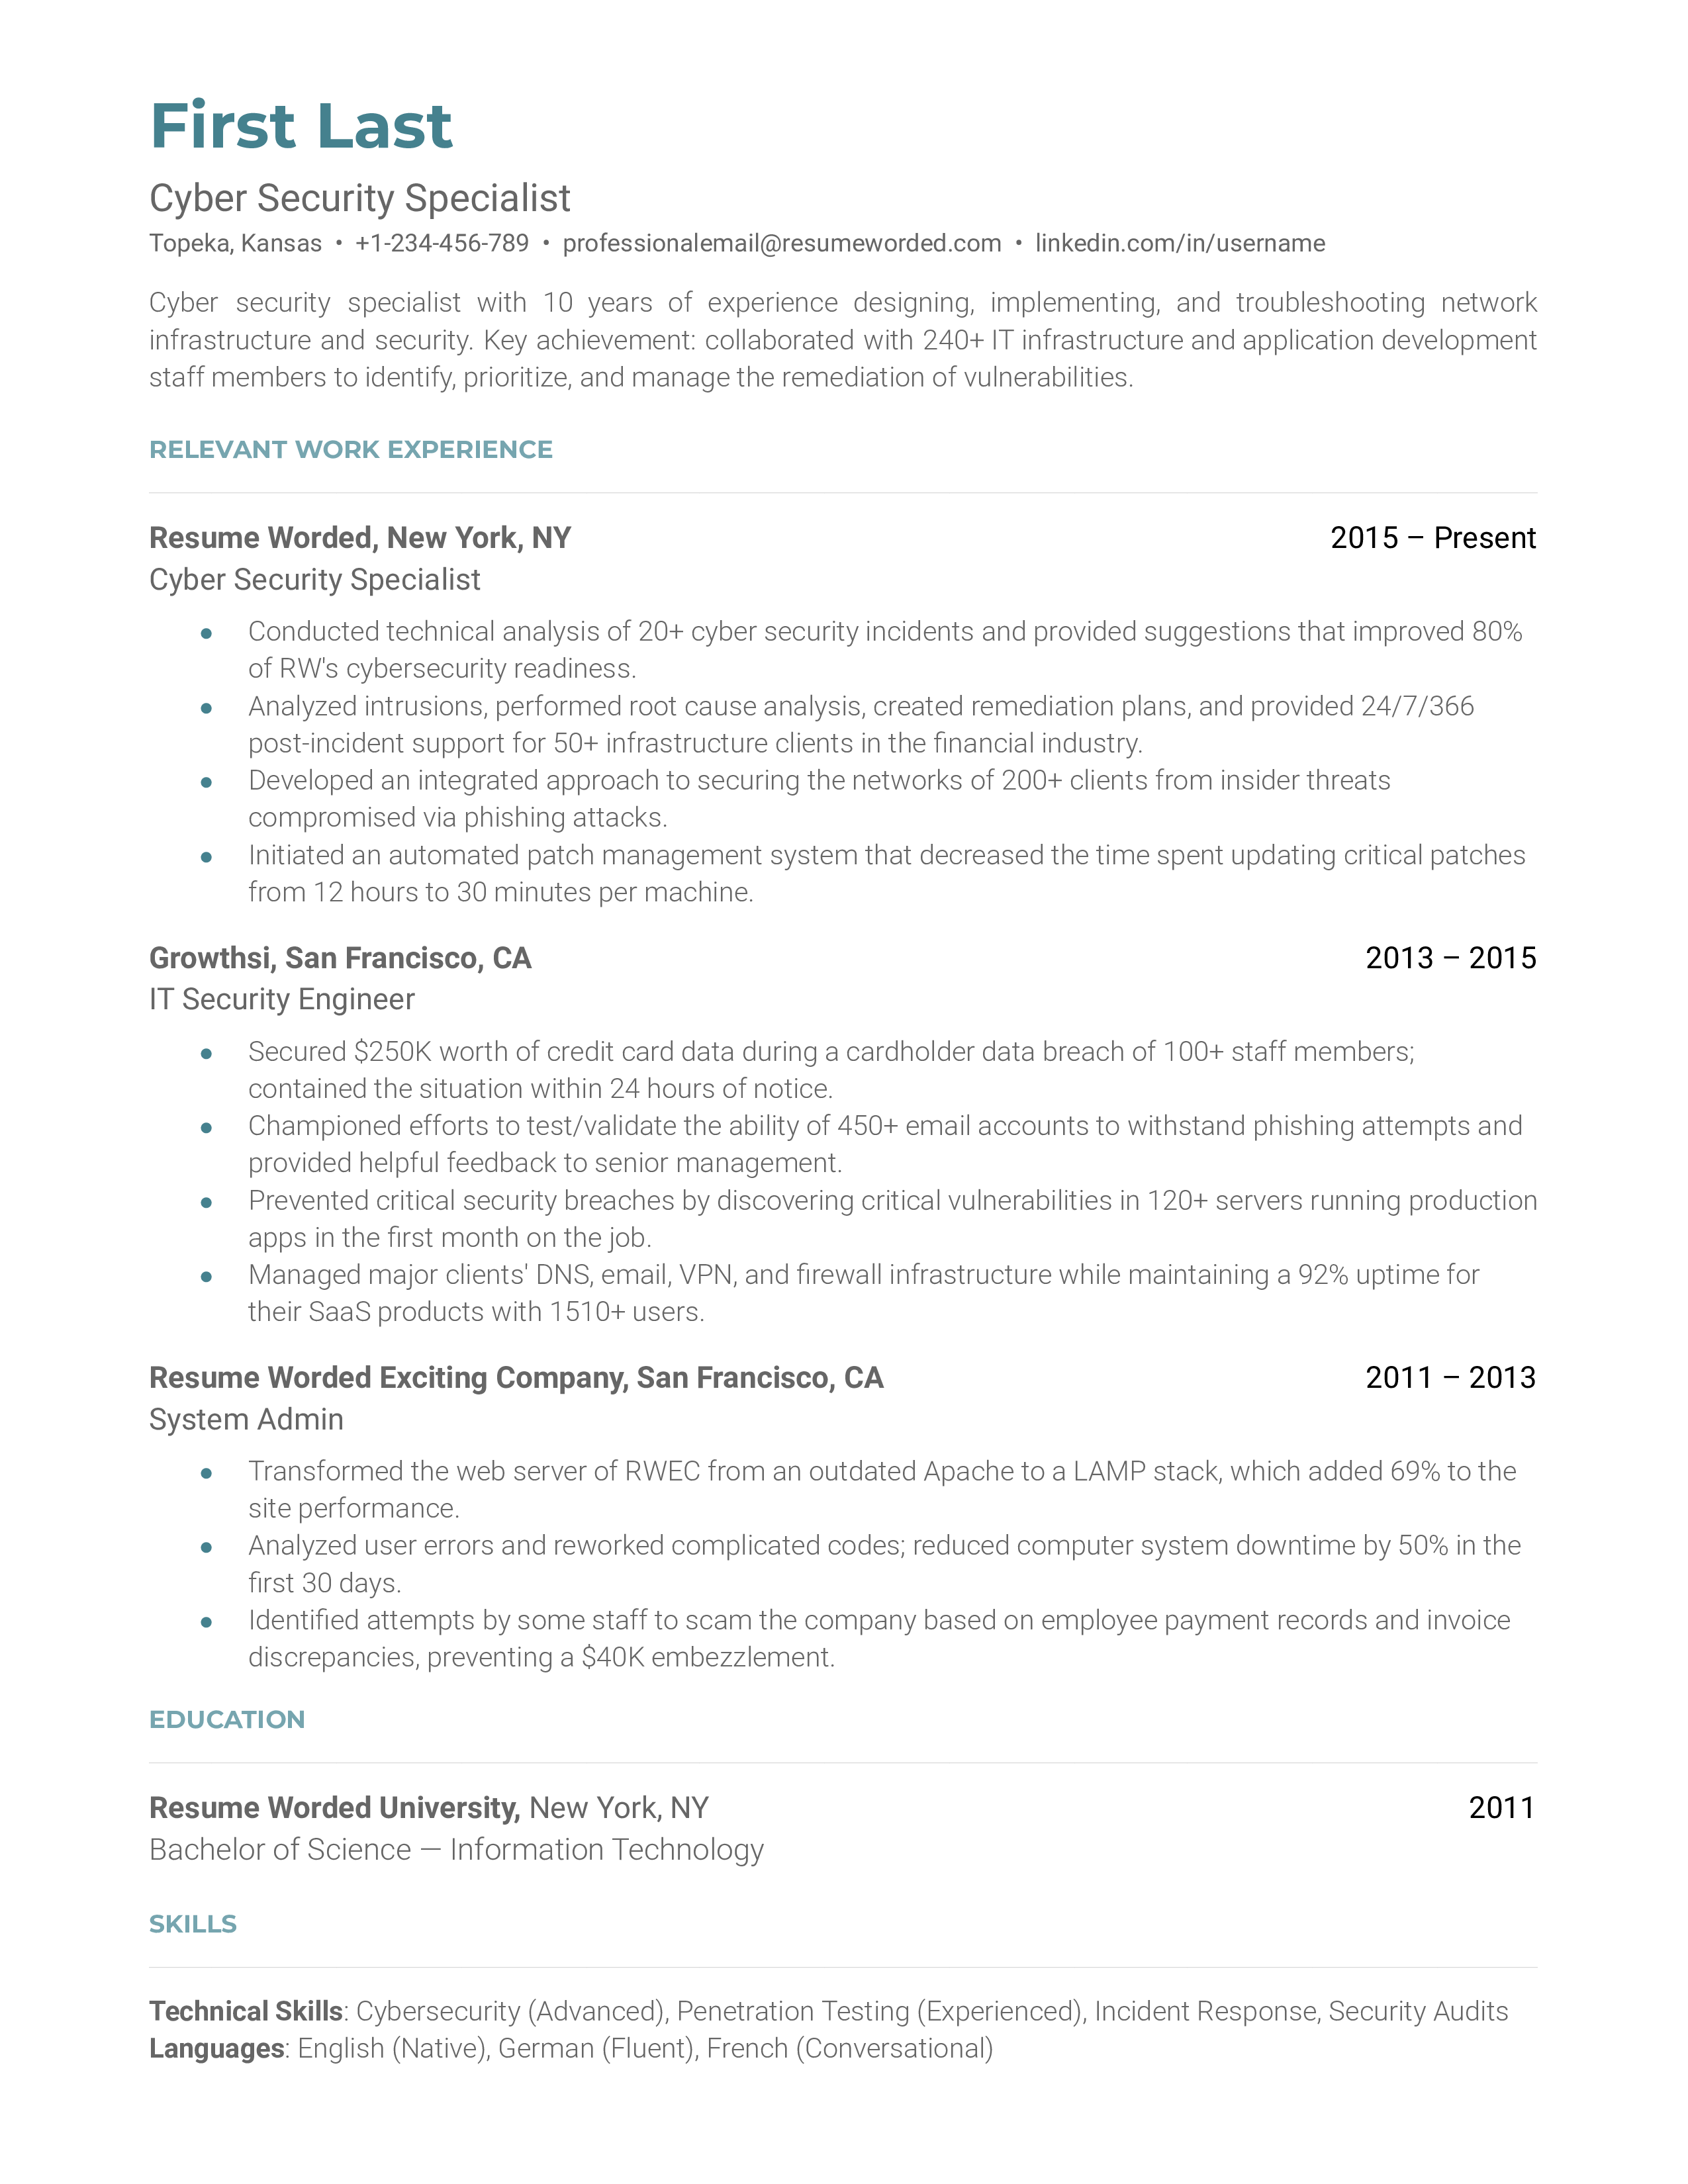 A cyber security specialist resume template prioritizing technical skills.